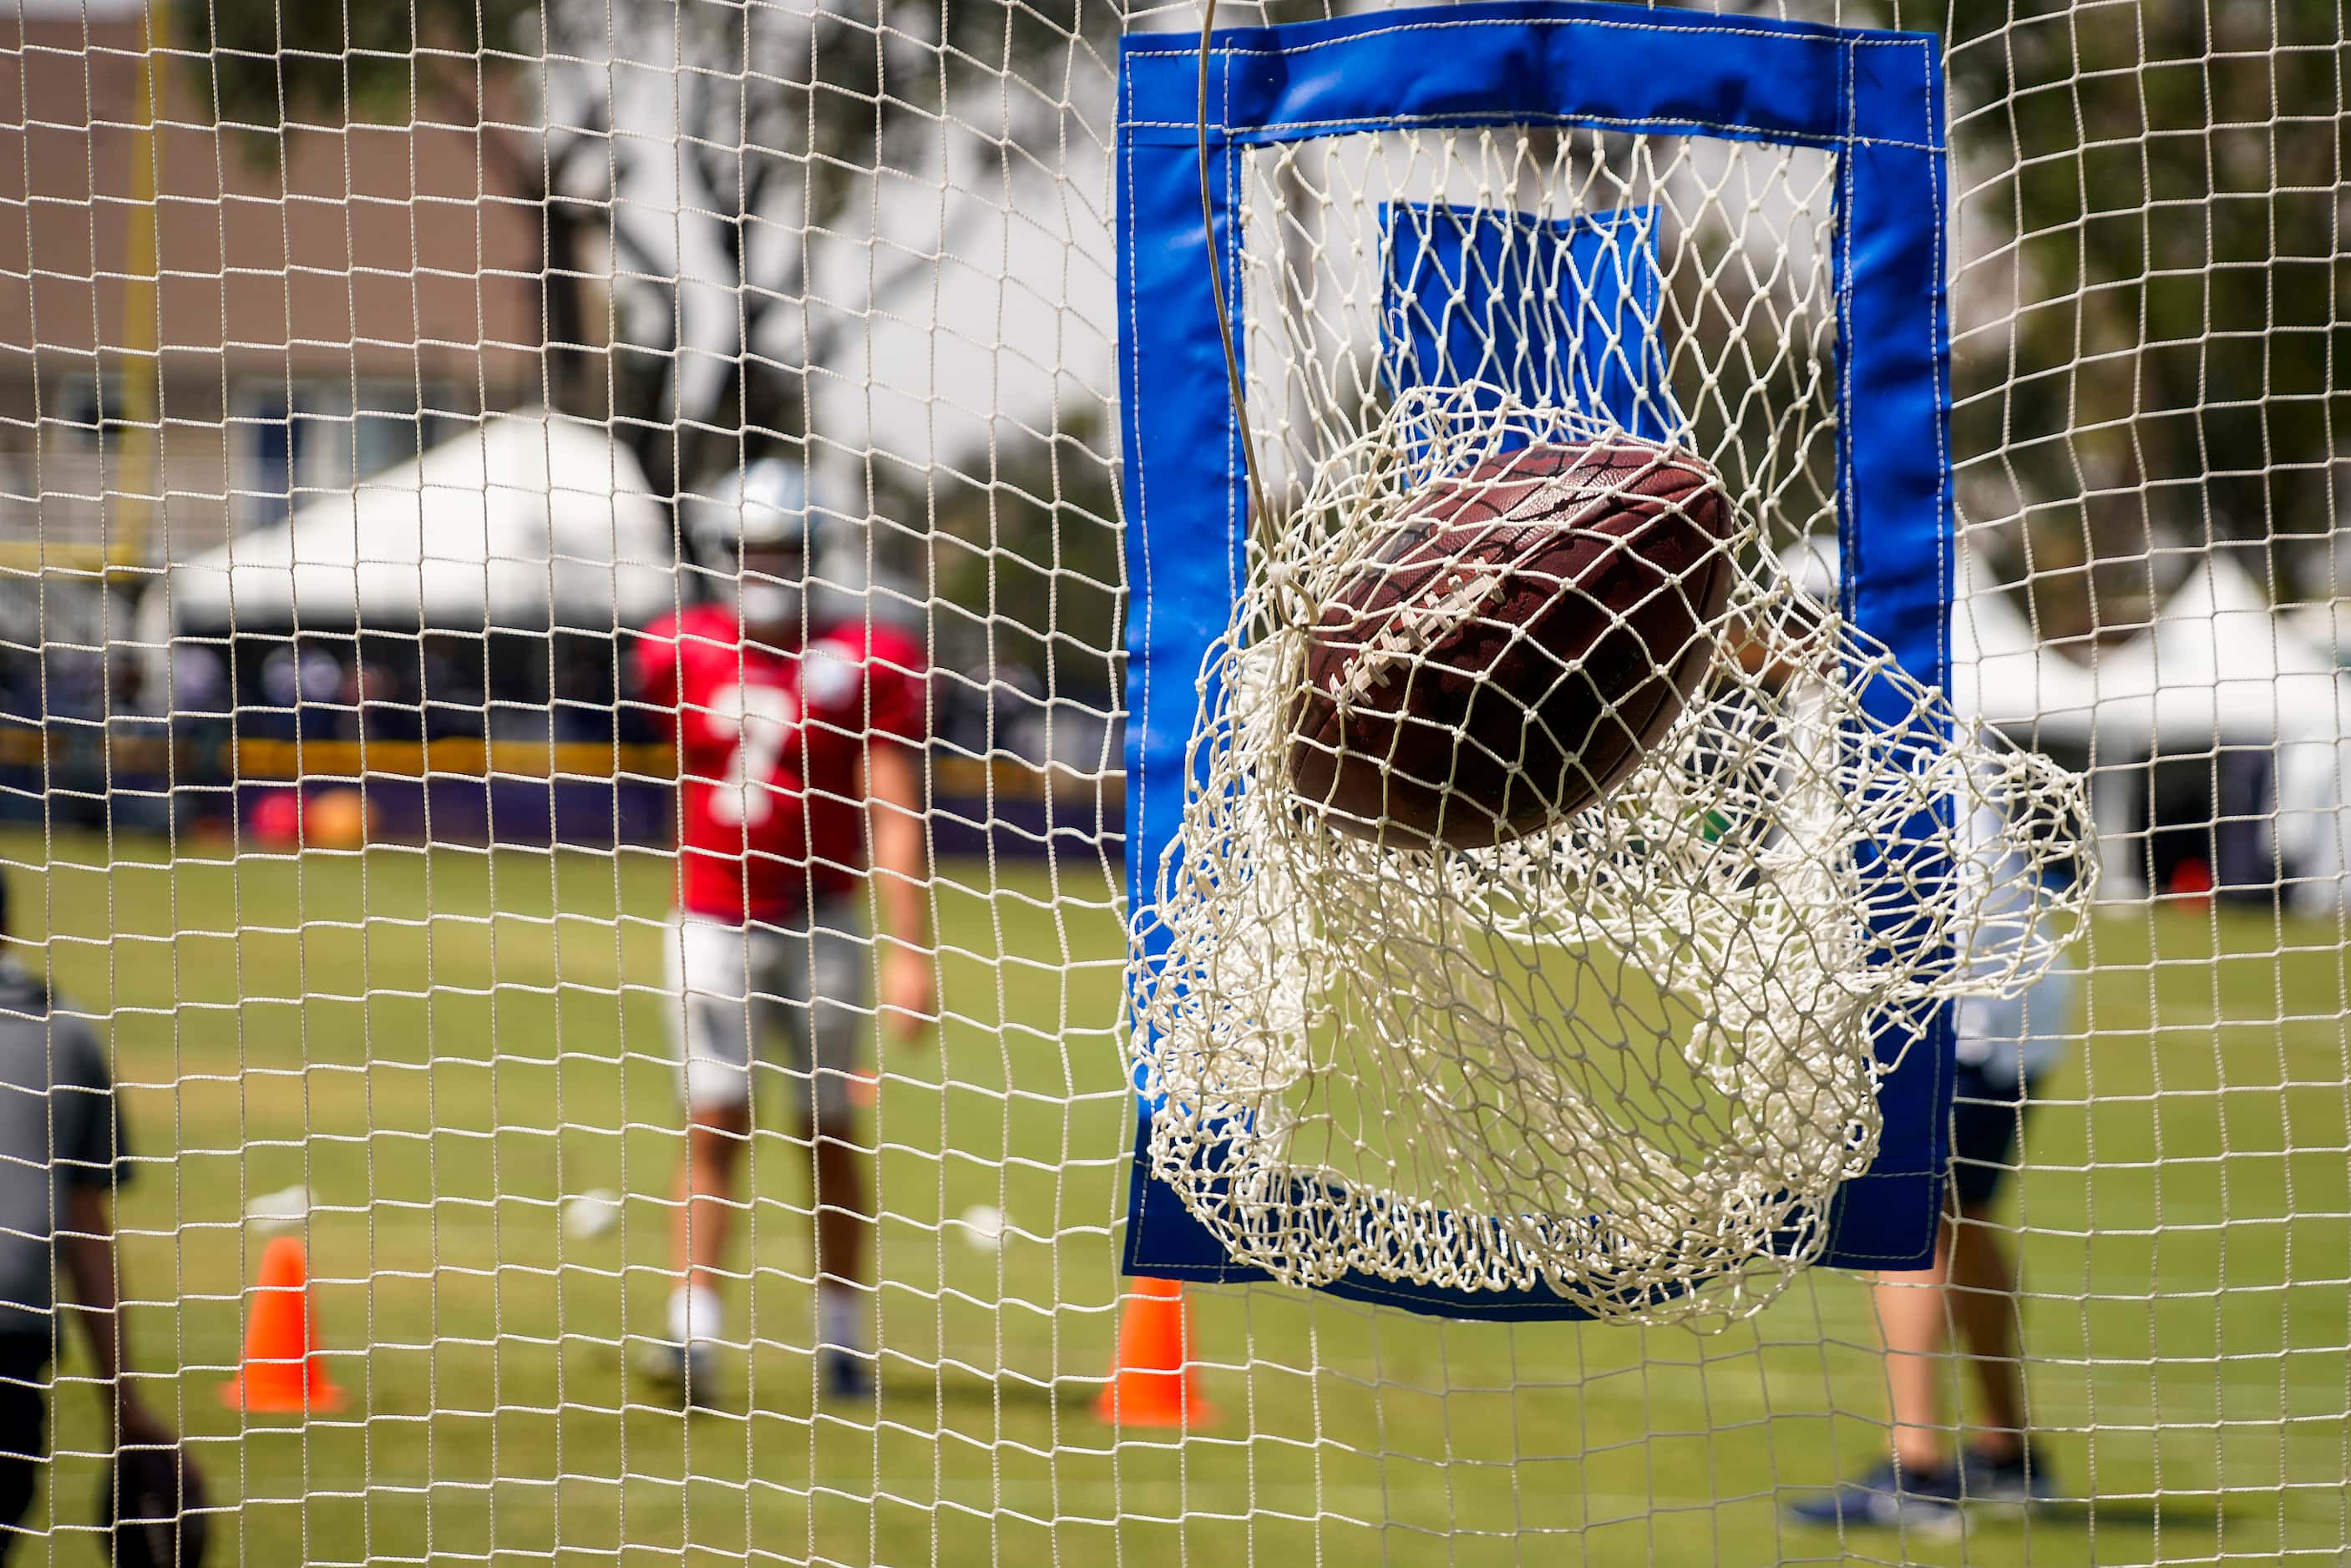 A pass by Dallas Cowboys quarterback Ben DiNucci (7) rips a target net during a practice at...